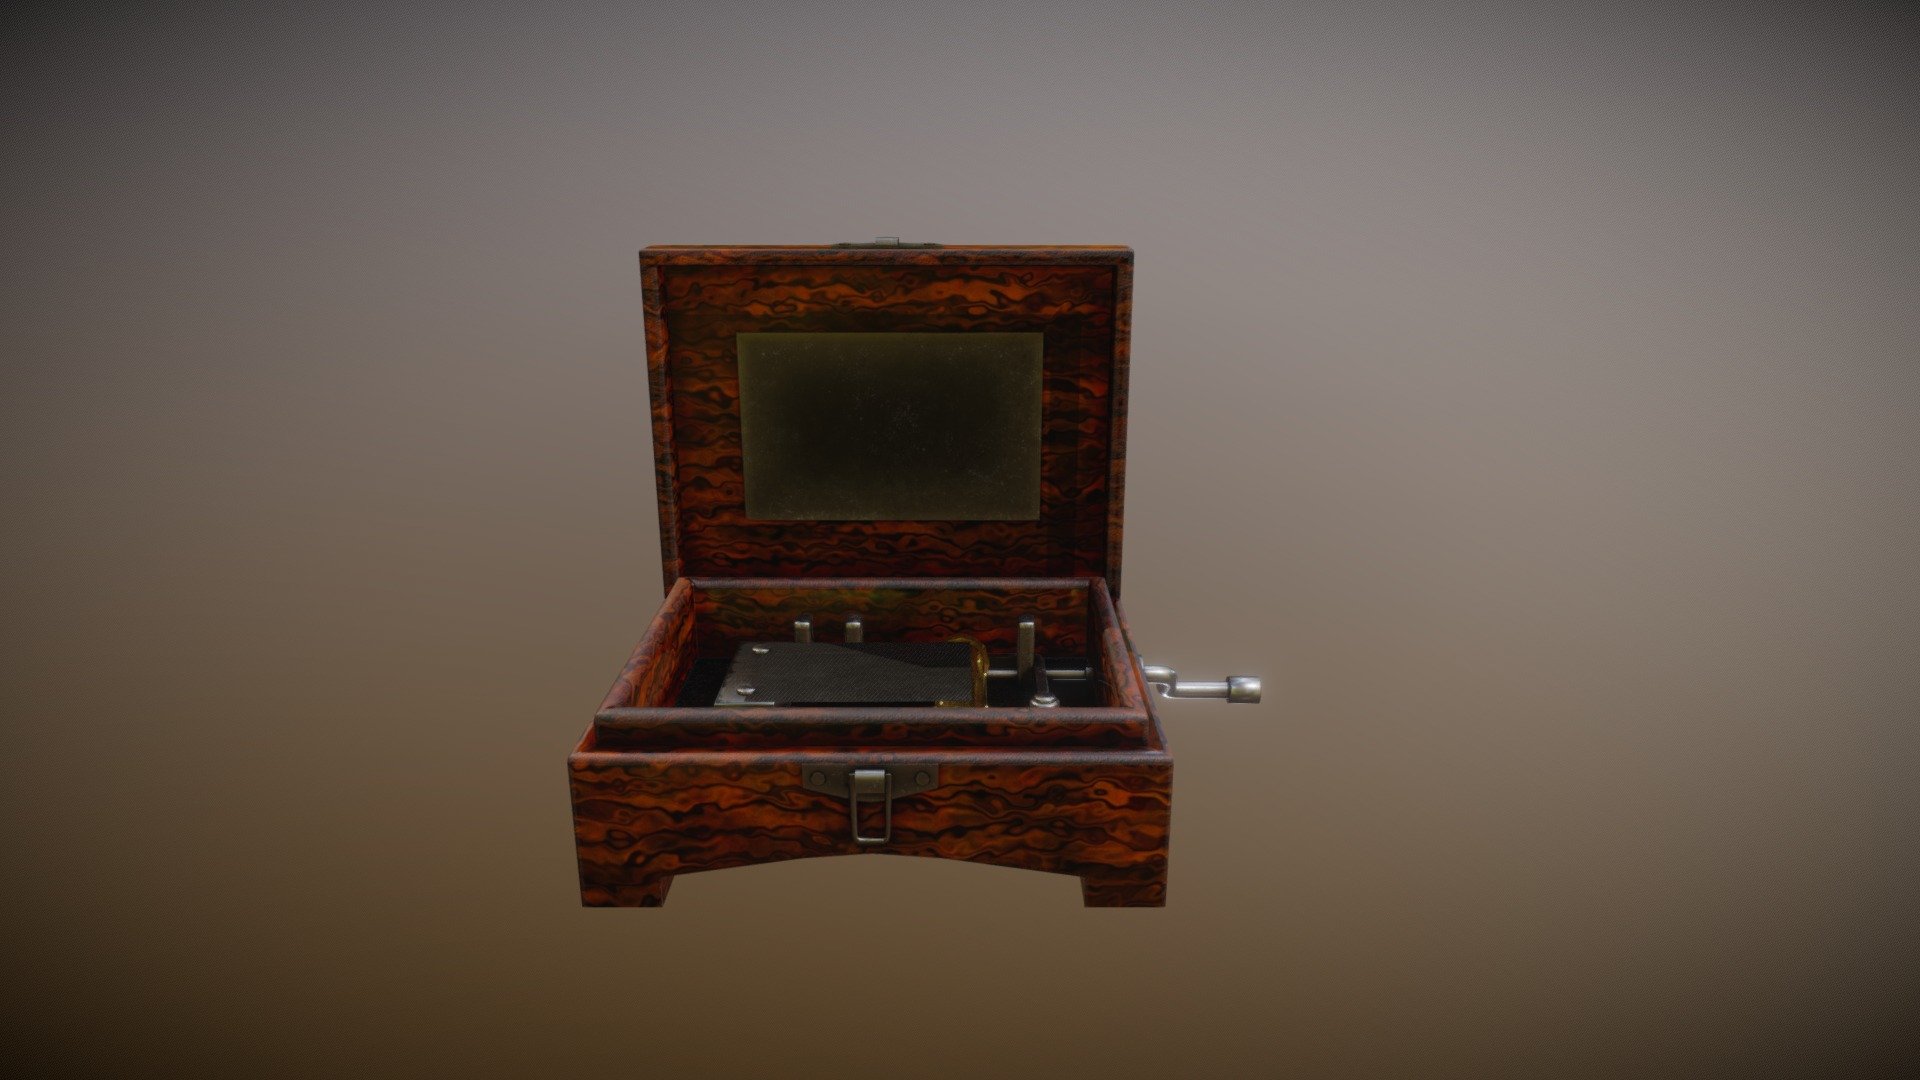 This is a model of an old music box 3d model